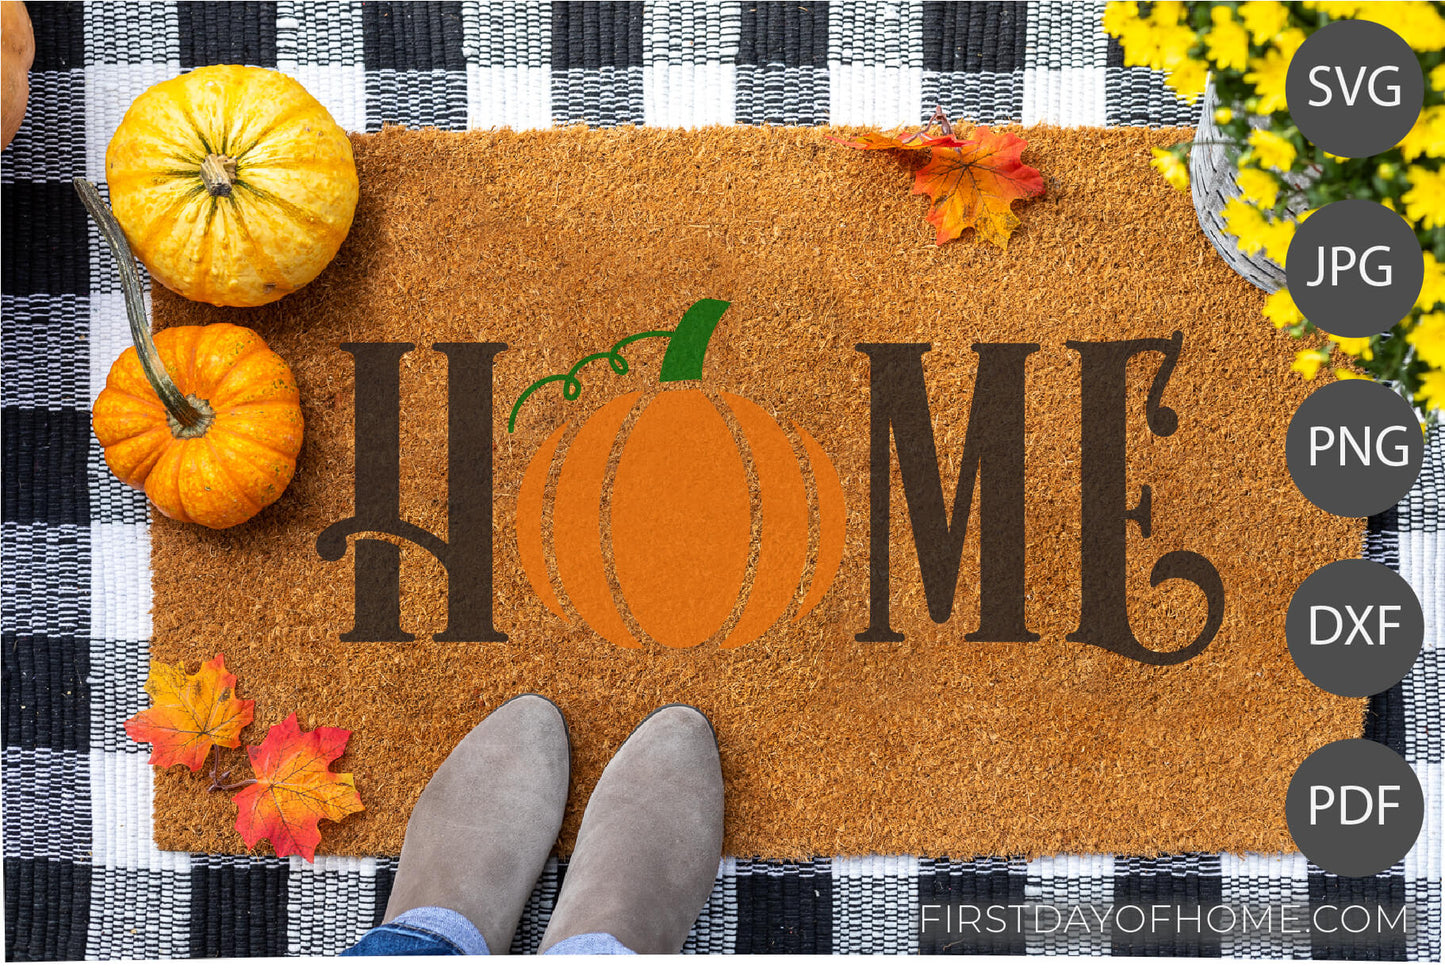 Mockup example of Home fall doormat design with pumpkin for "o" using digital files. Lists digital files as SVG, JPG, PNG, DXF and PDF